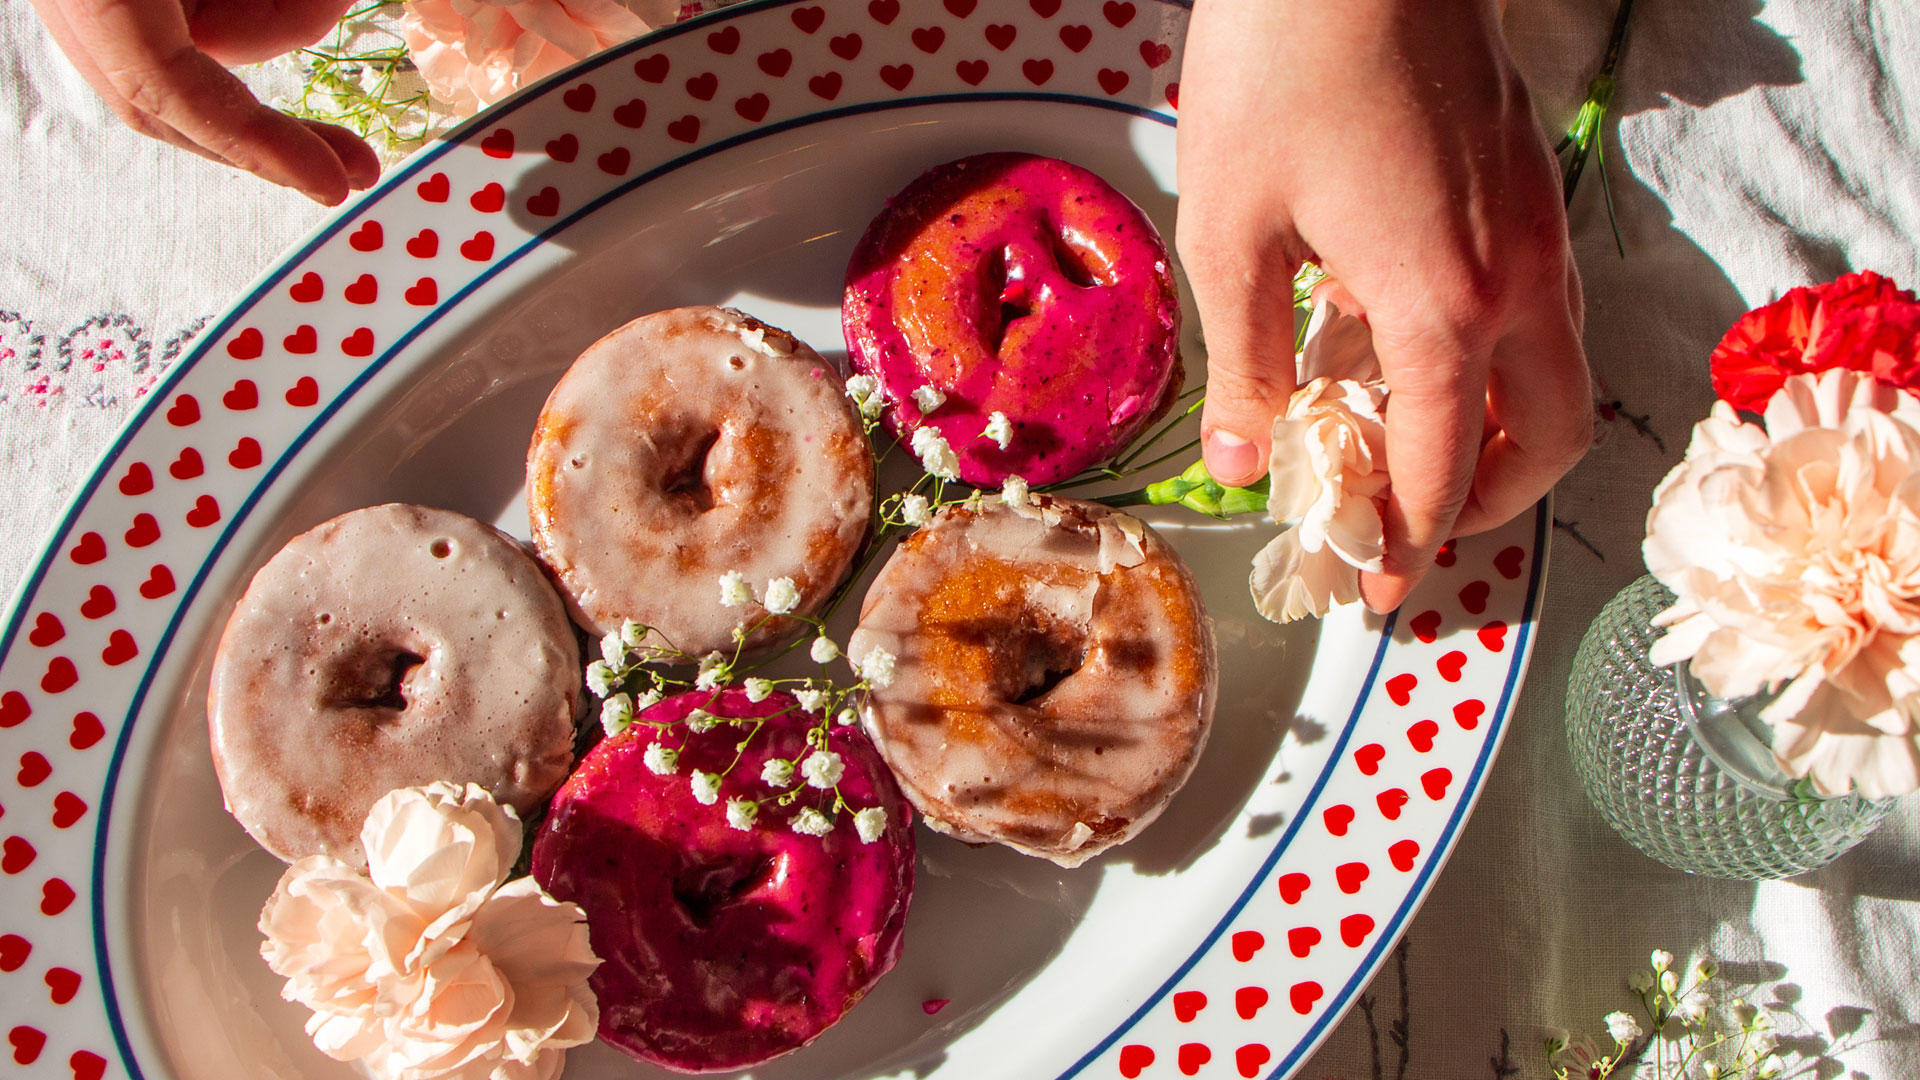 Assorted Donuts on a decorative plate with flowers